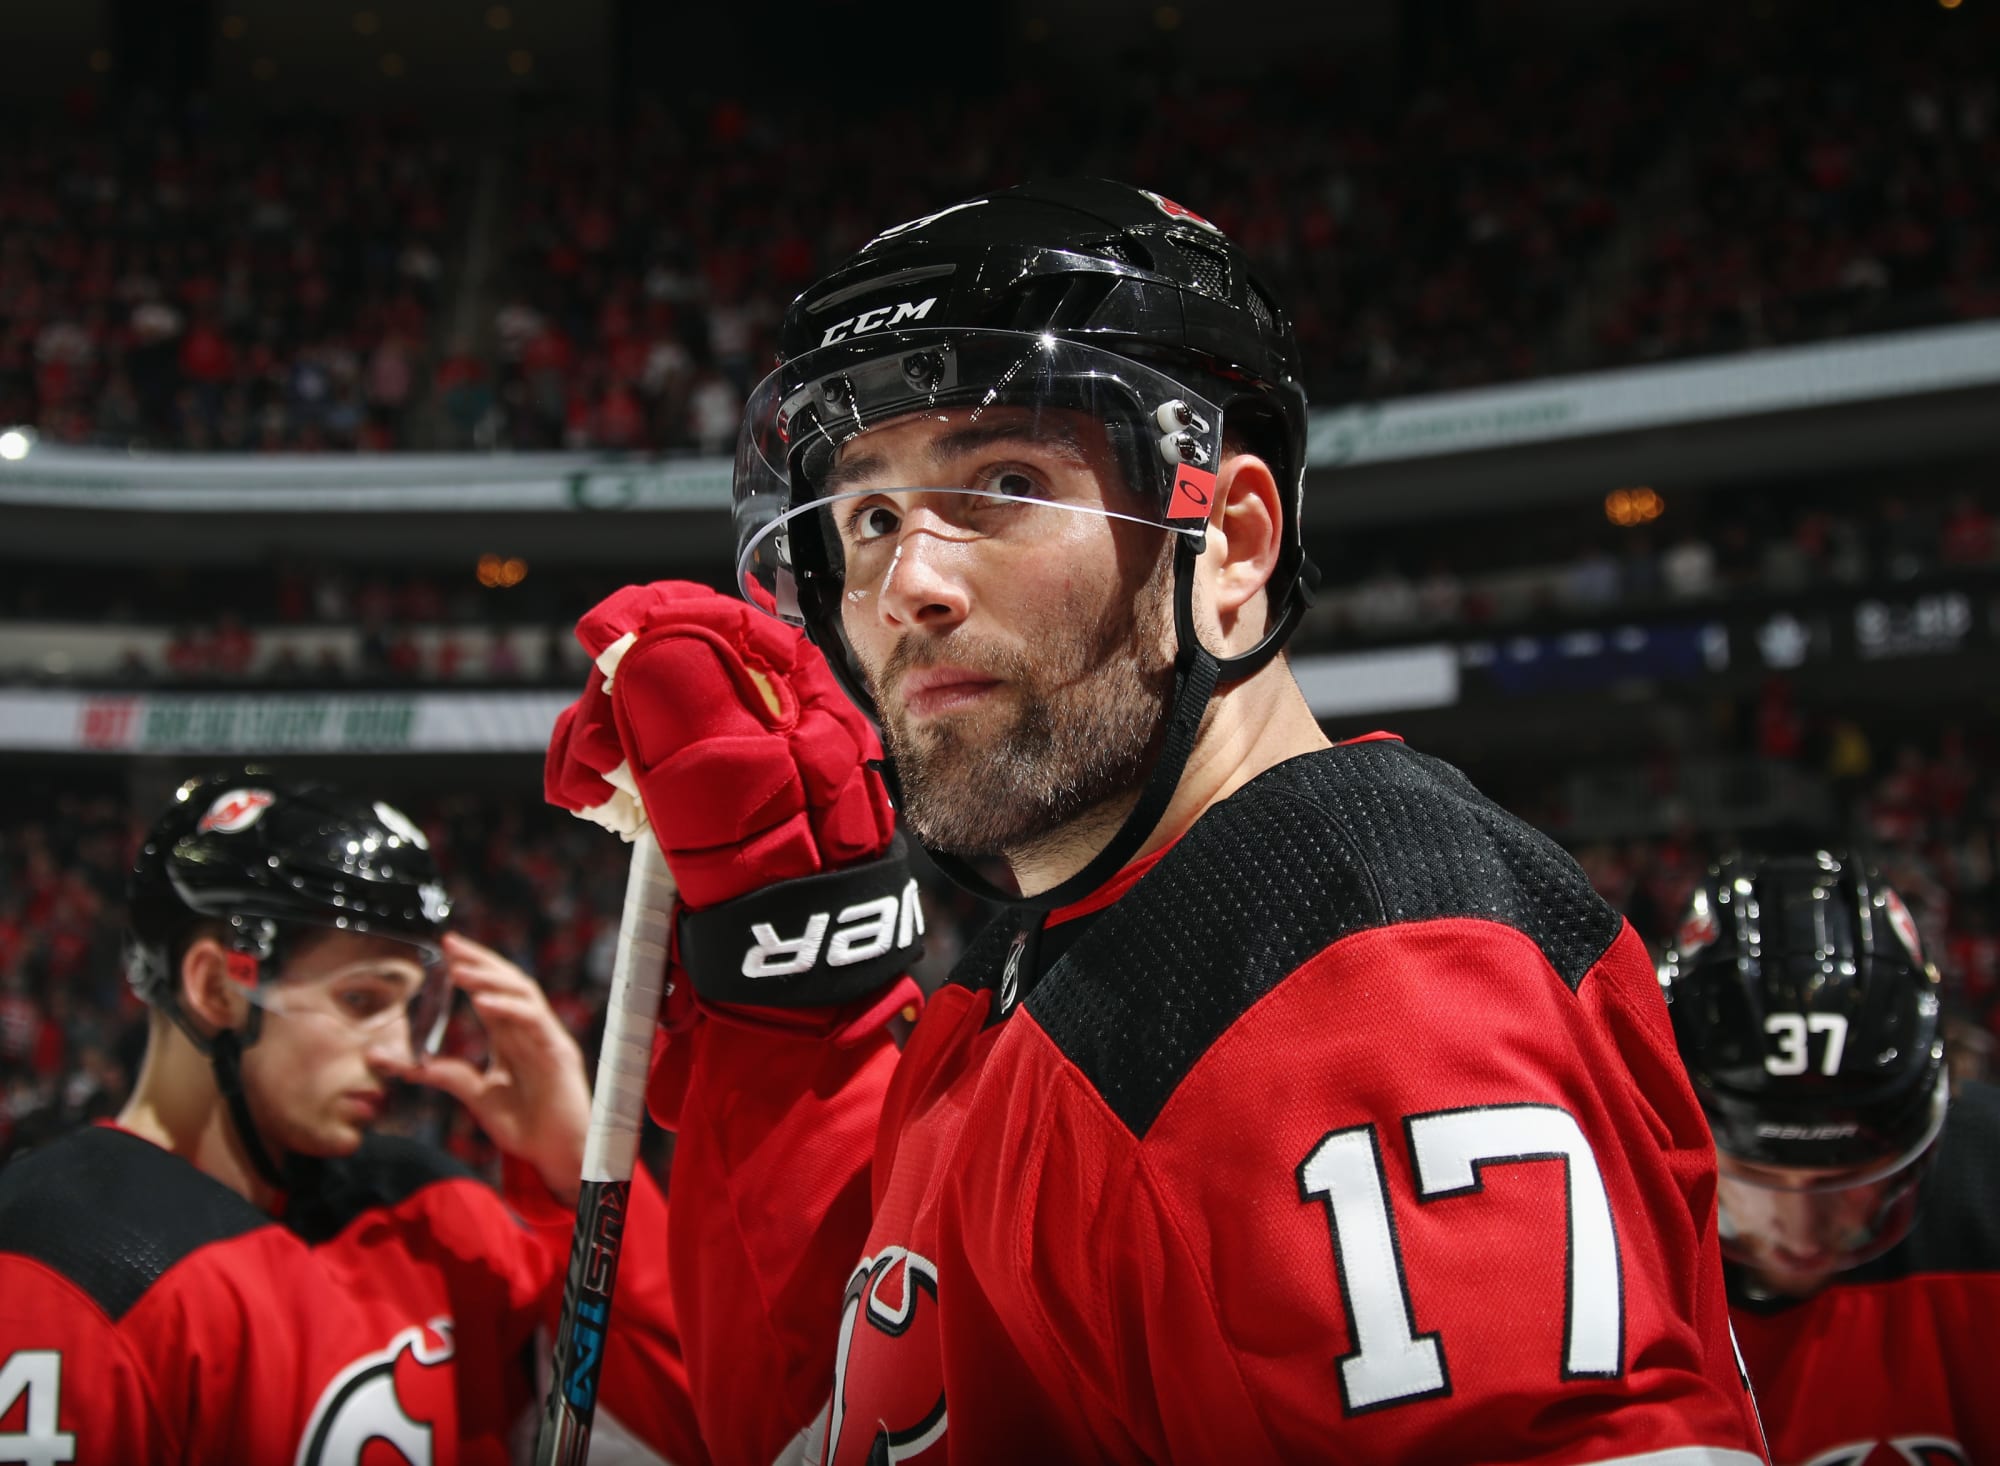 Should New Jersey Devils Try To Sign Patrick Maroon Again?